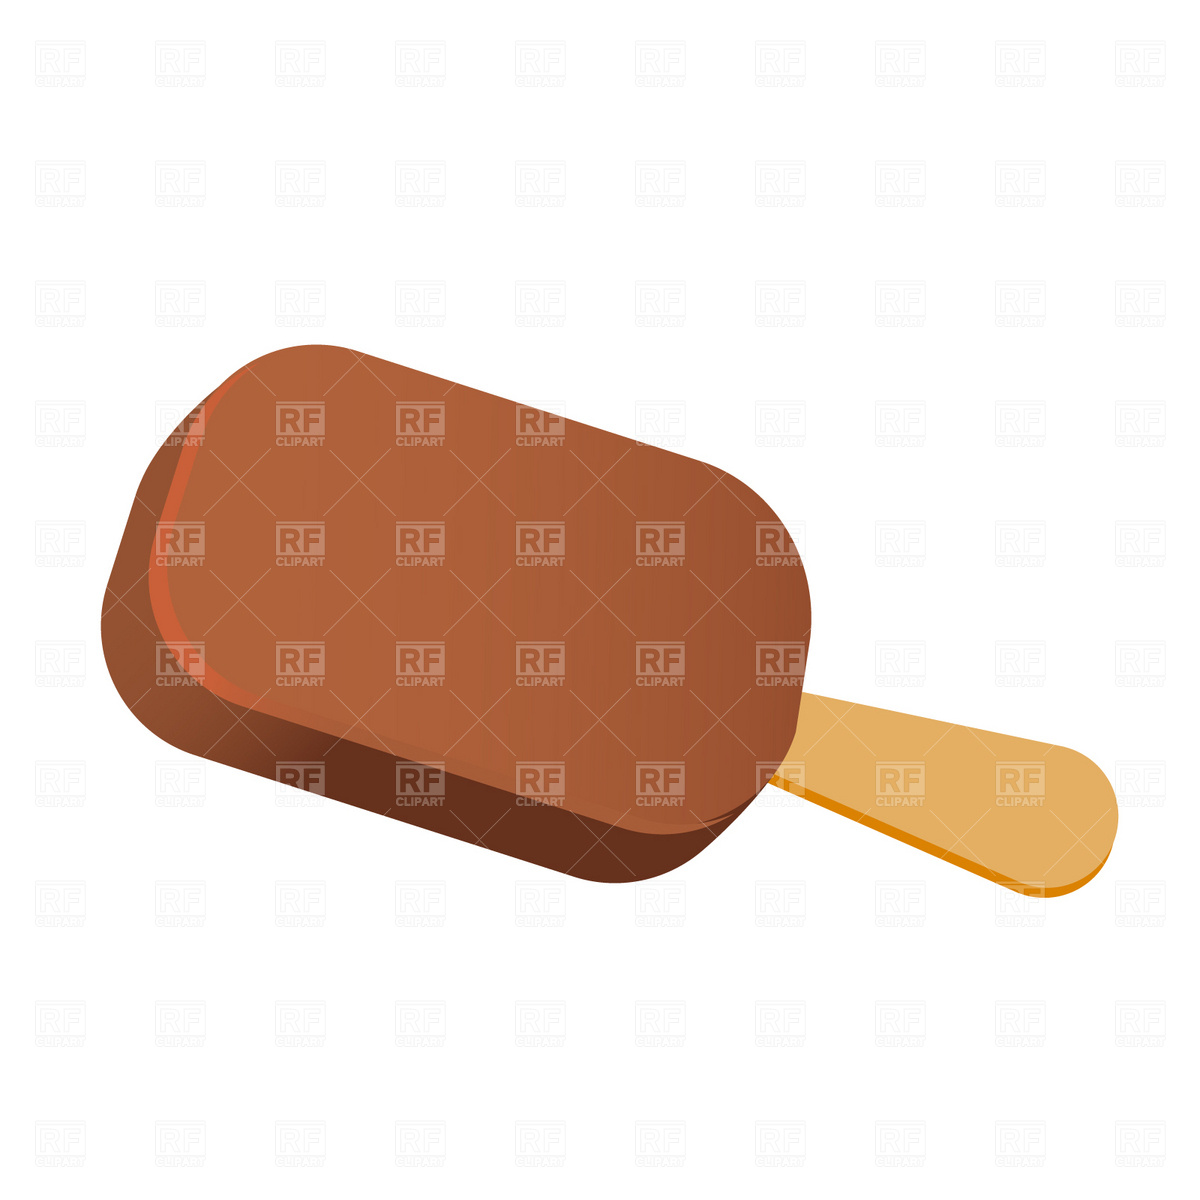 Chocolate Ice Cream On Stick 1746 Download Royalty Free Vector    